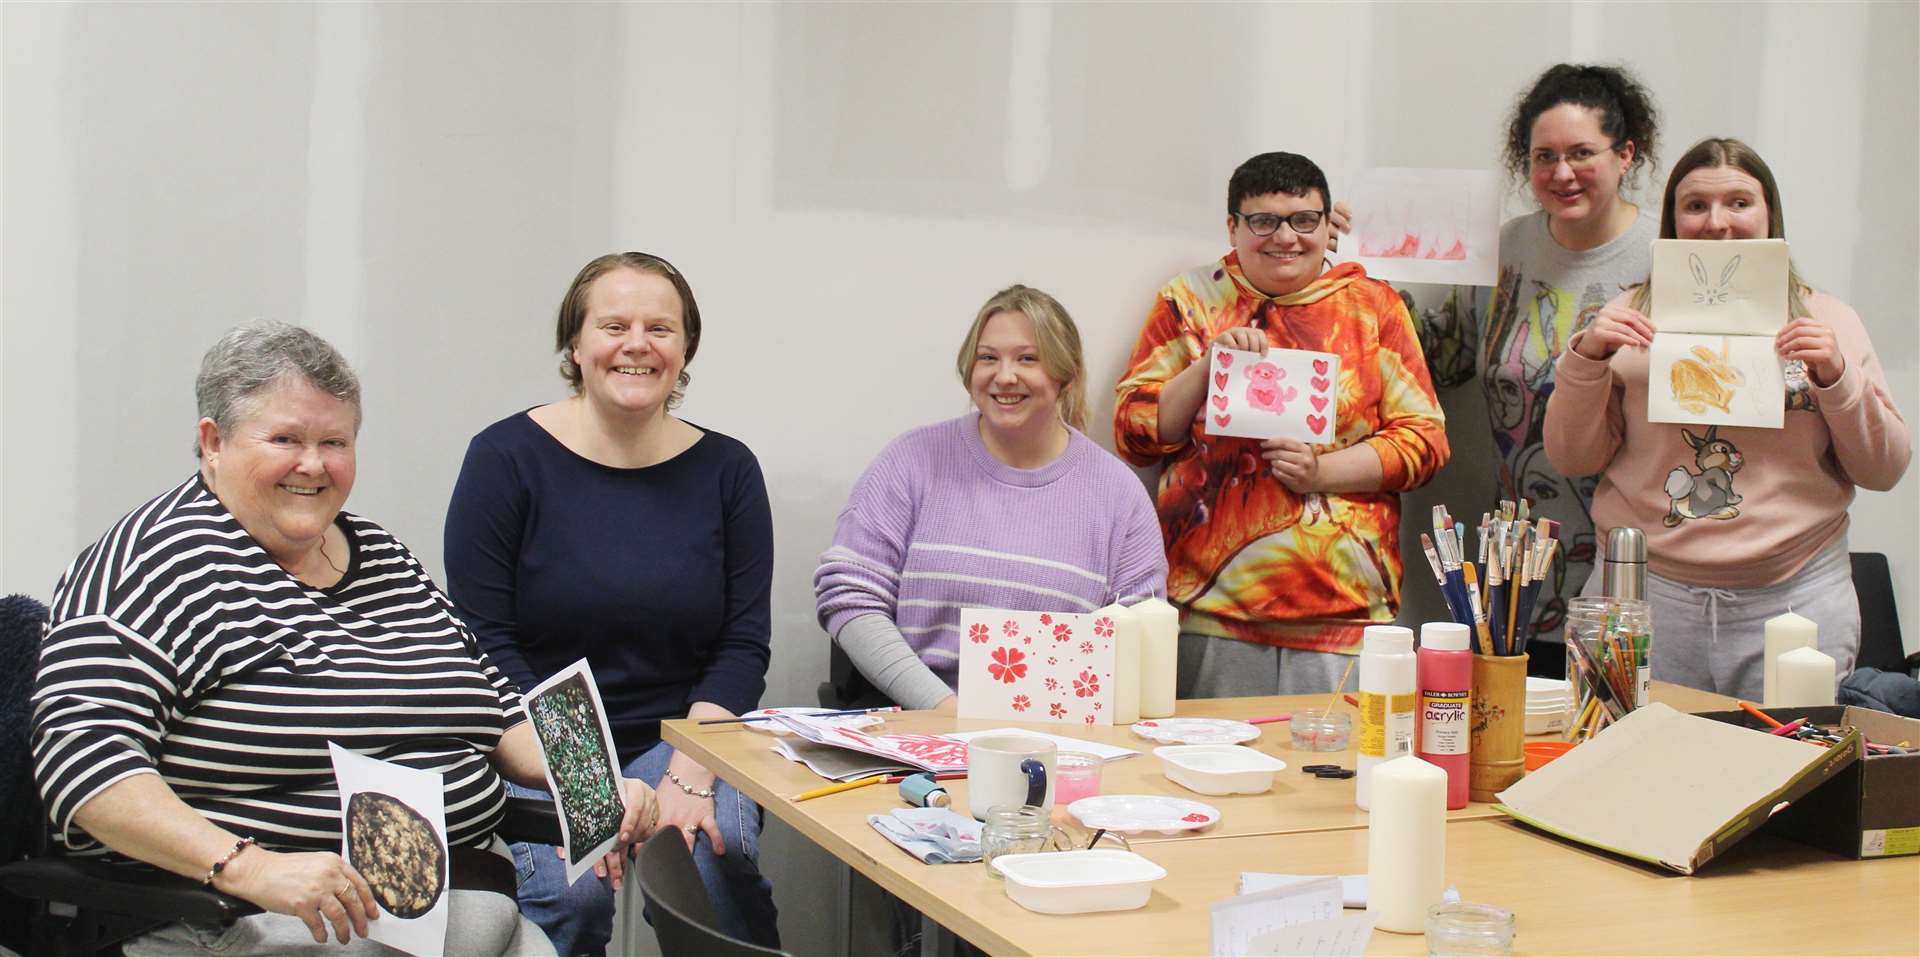 Arts and crafts students enjoyed a session of pillar candle decoration as well as making new friends at the creative hub at GO premises, West High Street, Inverurie with tutor Millie Farmer (right) and Emma Brew, community engagement therapy worker, Picture: Griselda McGregor